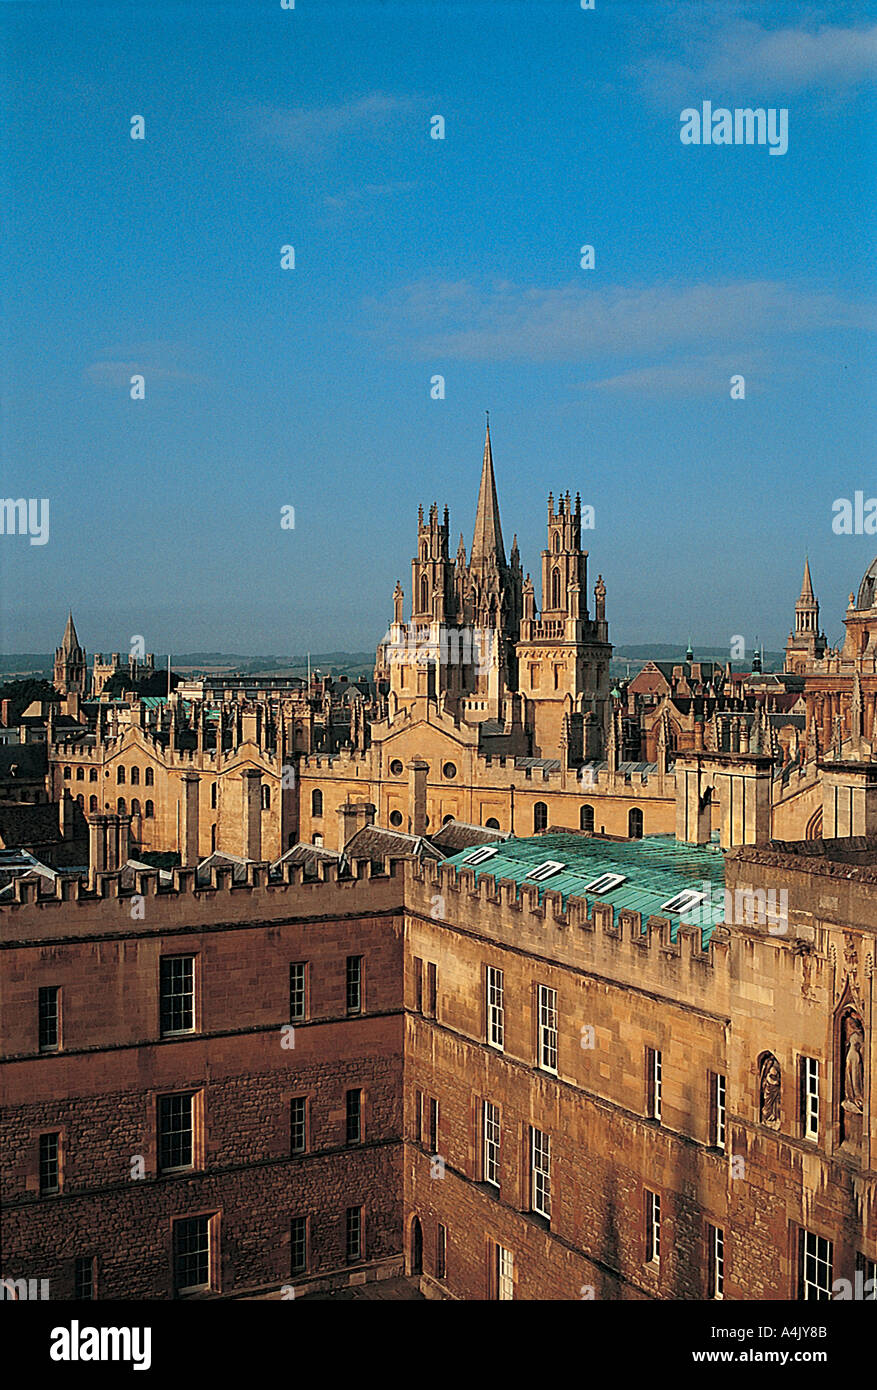 View across rooftops towards Hawksmoor Towers and St Marys Church, Oxford Stock Photo